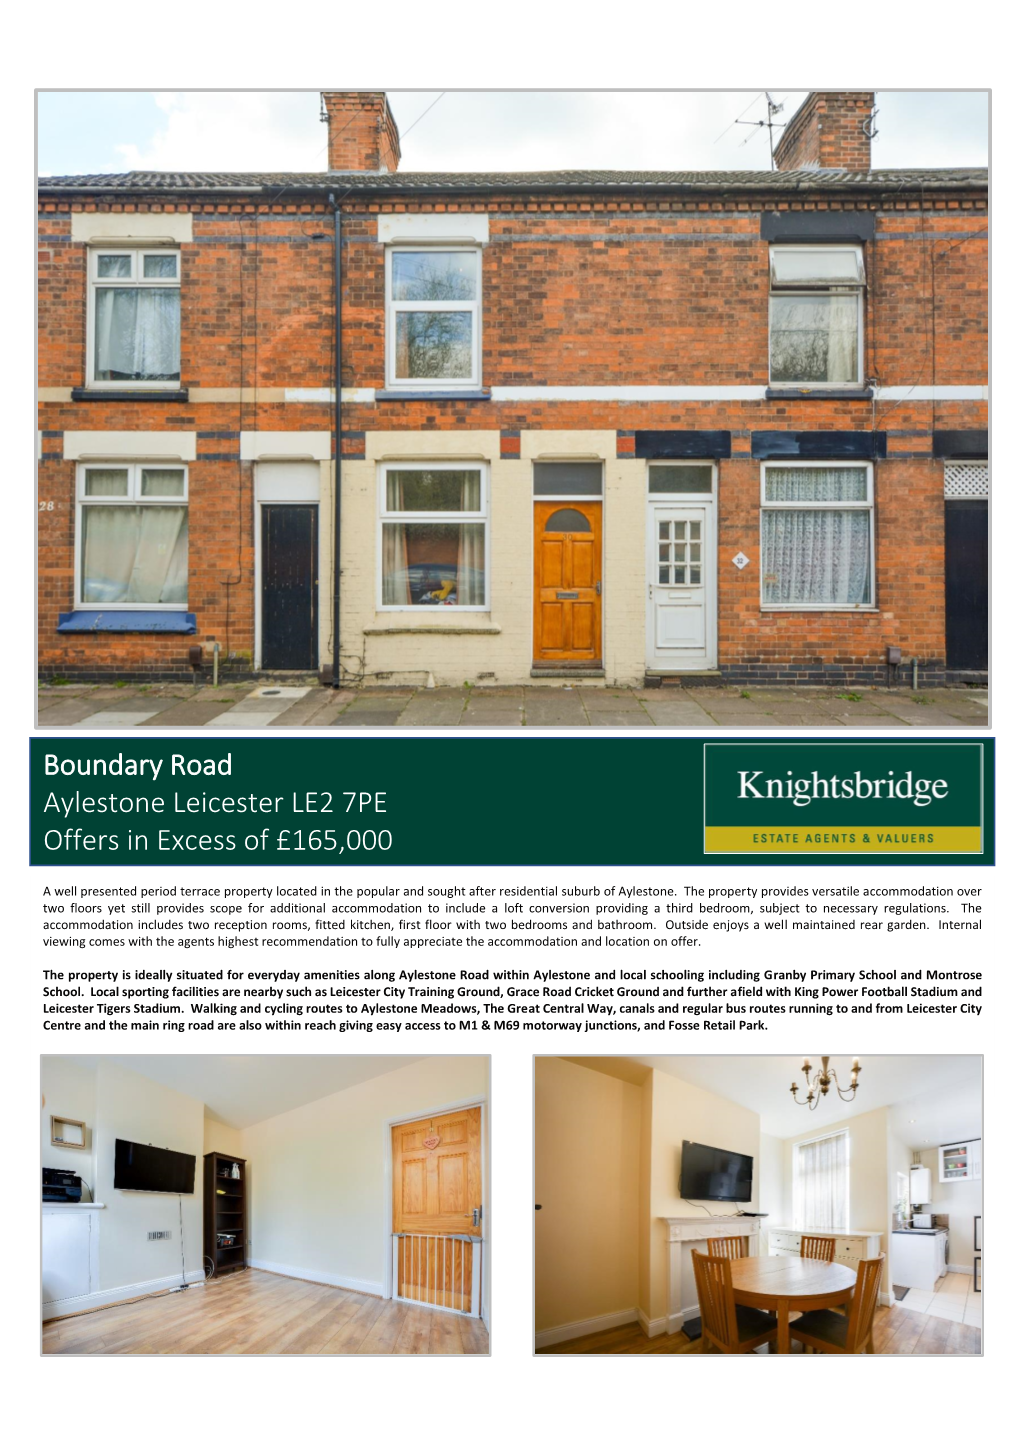 Boundary Road Aylestone Leicester LE2 7PE Offers in Excess of £165,000